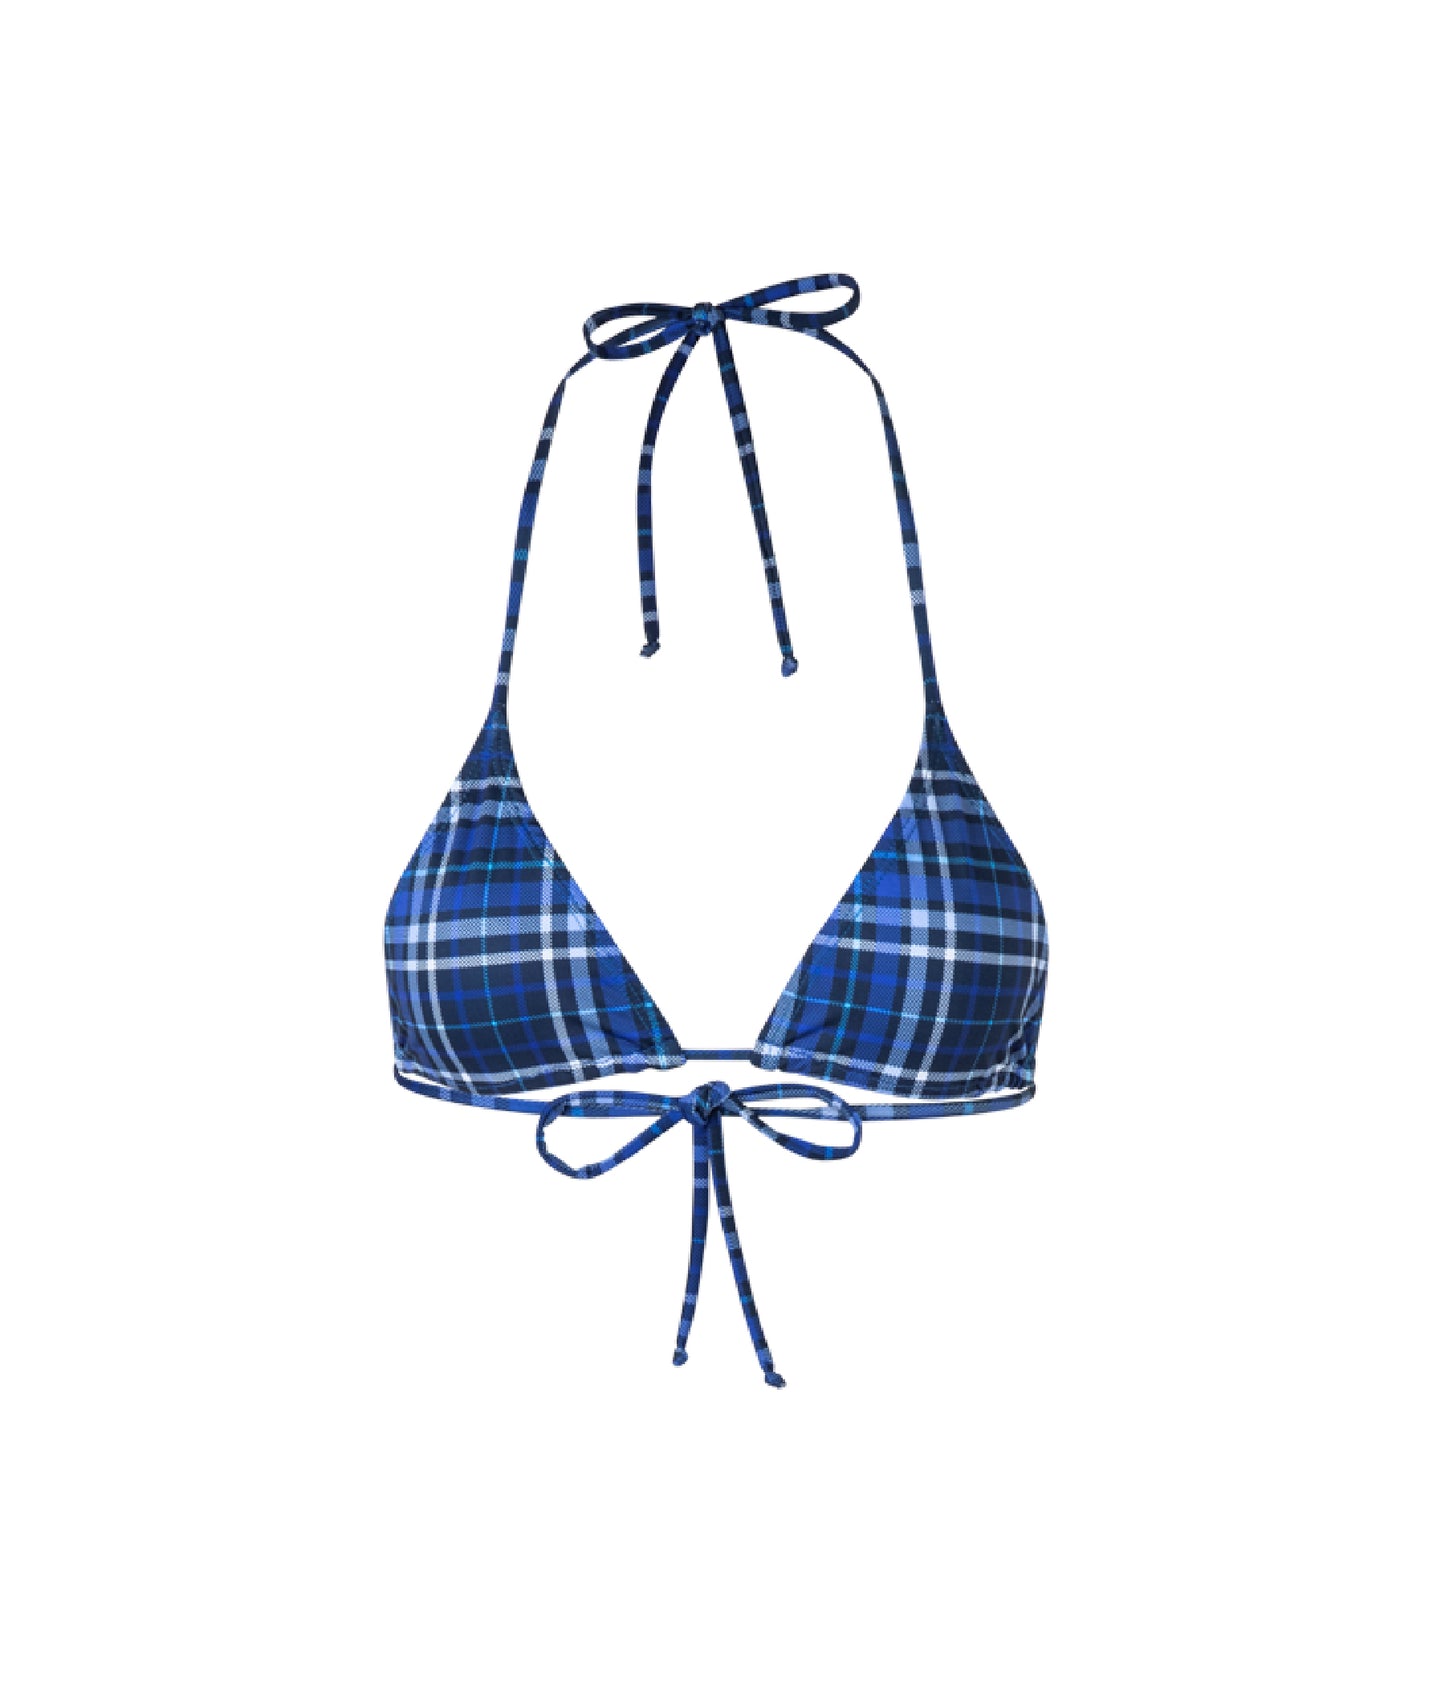 Load image into Gallery viewer, Verdelimon - Bikini Top - Moa - Printed - Blue Tartan - Front
